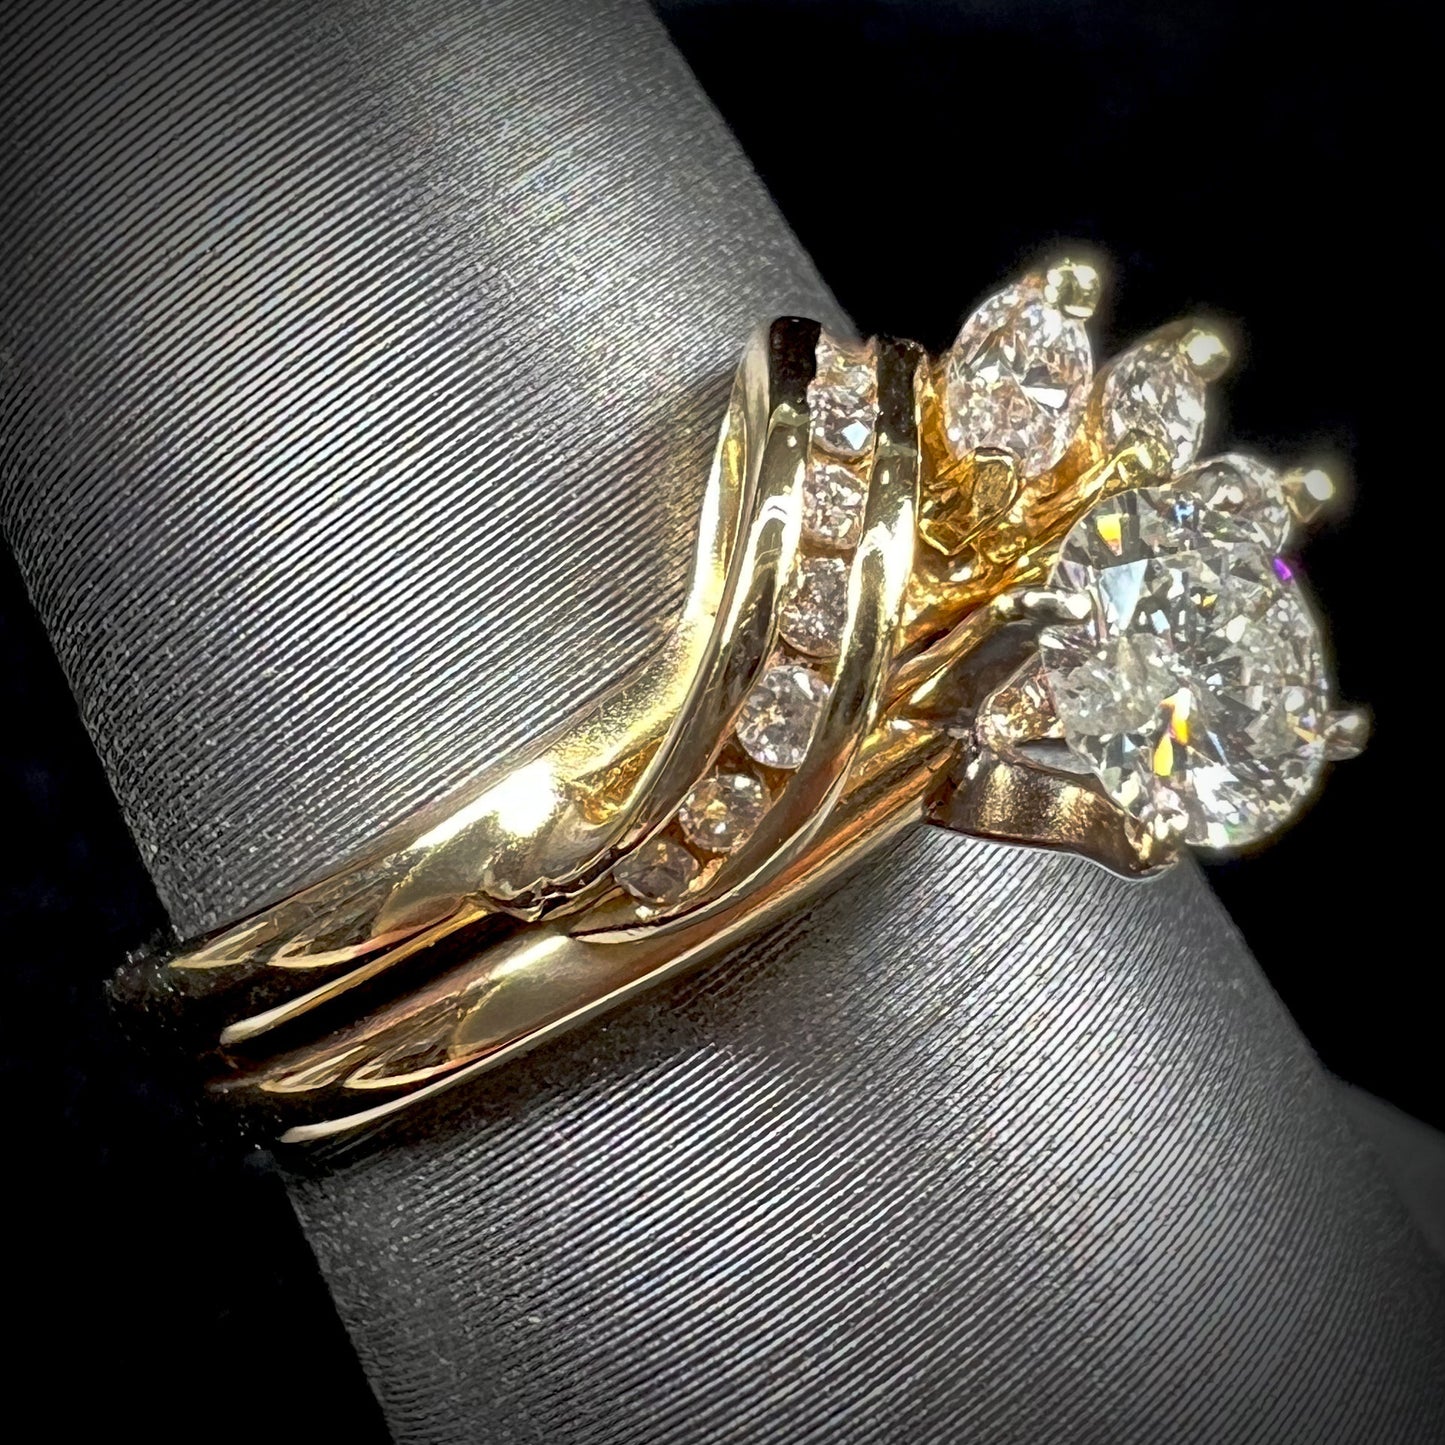 A ladies' diamond wedding set that has been soldered together in yellow gold.  There are round and marquise cut diamonds.